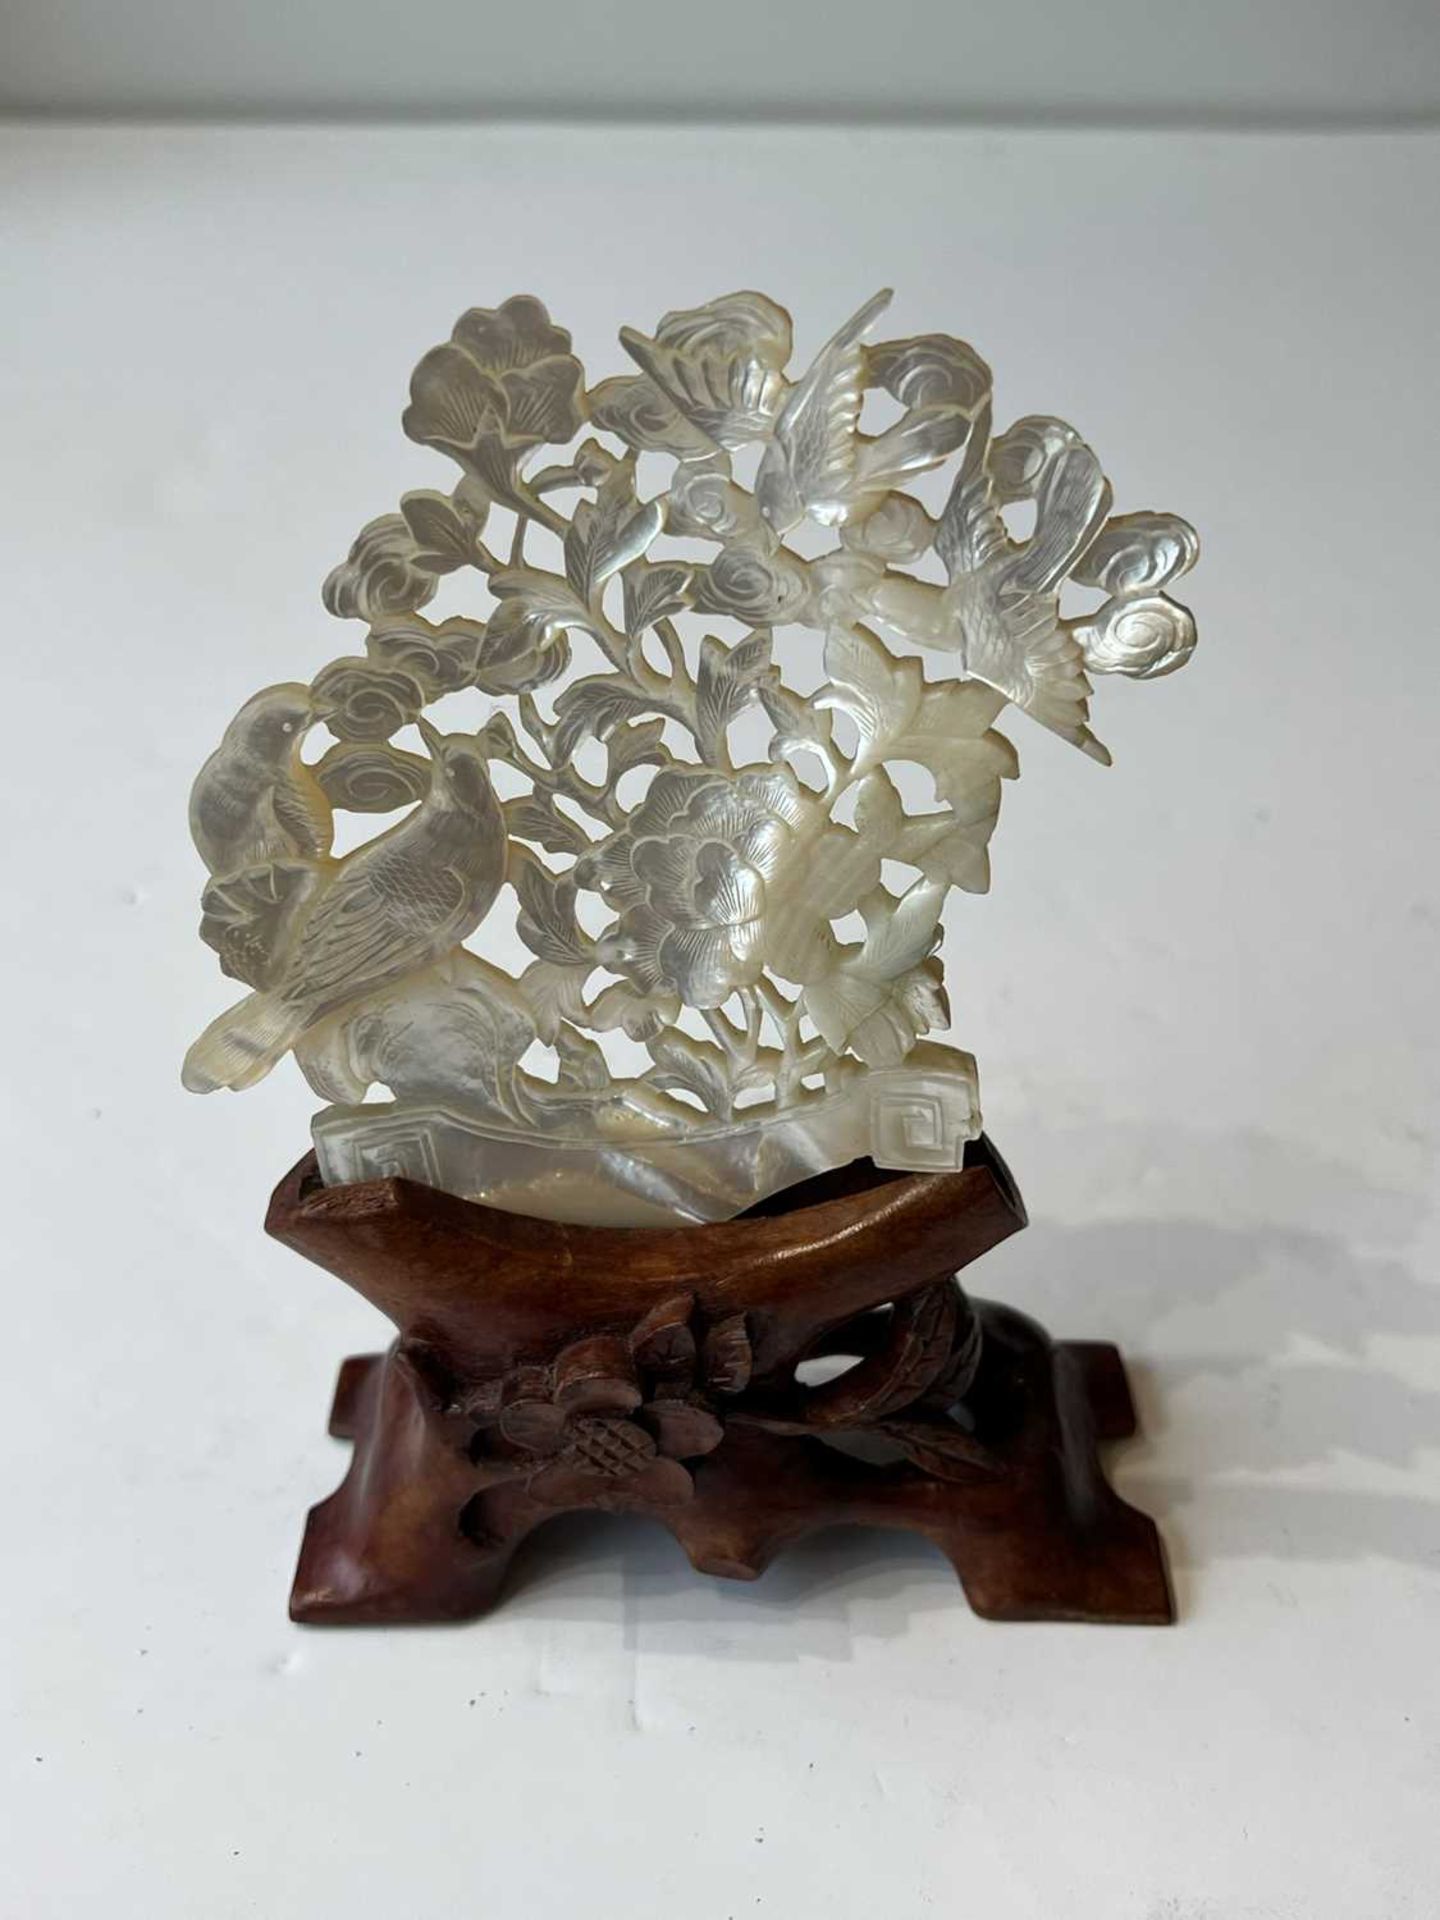 AN EARLY 20TH CENTURY CHINESE CARVED MOTHER-OF-PEARL SHELL - Image 2 of 3